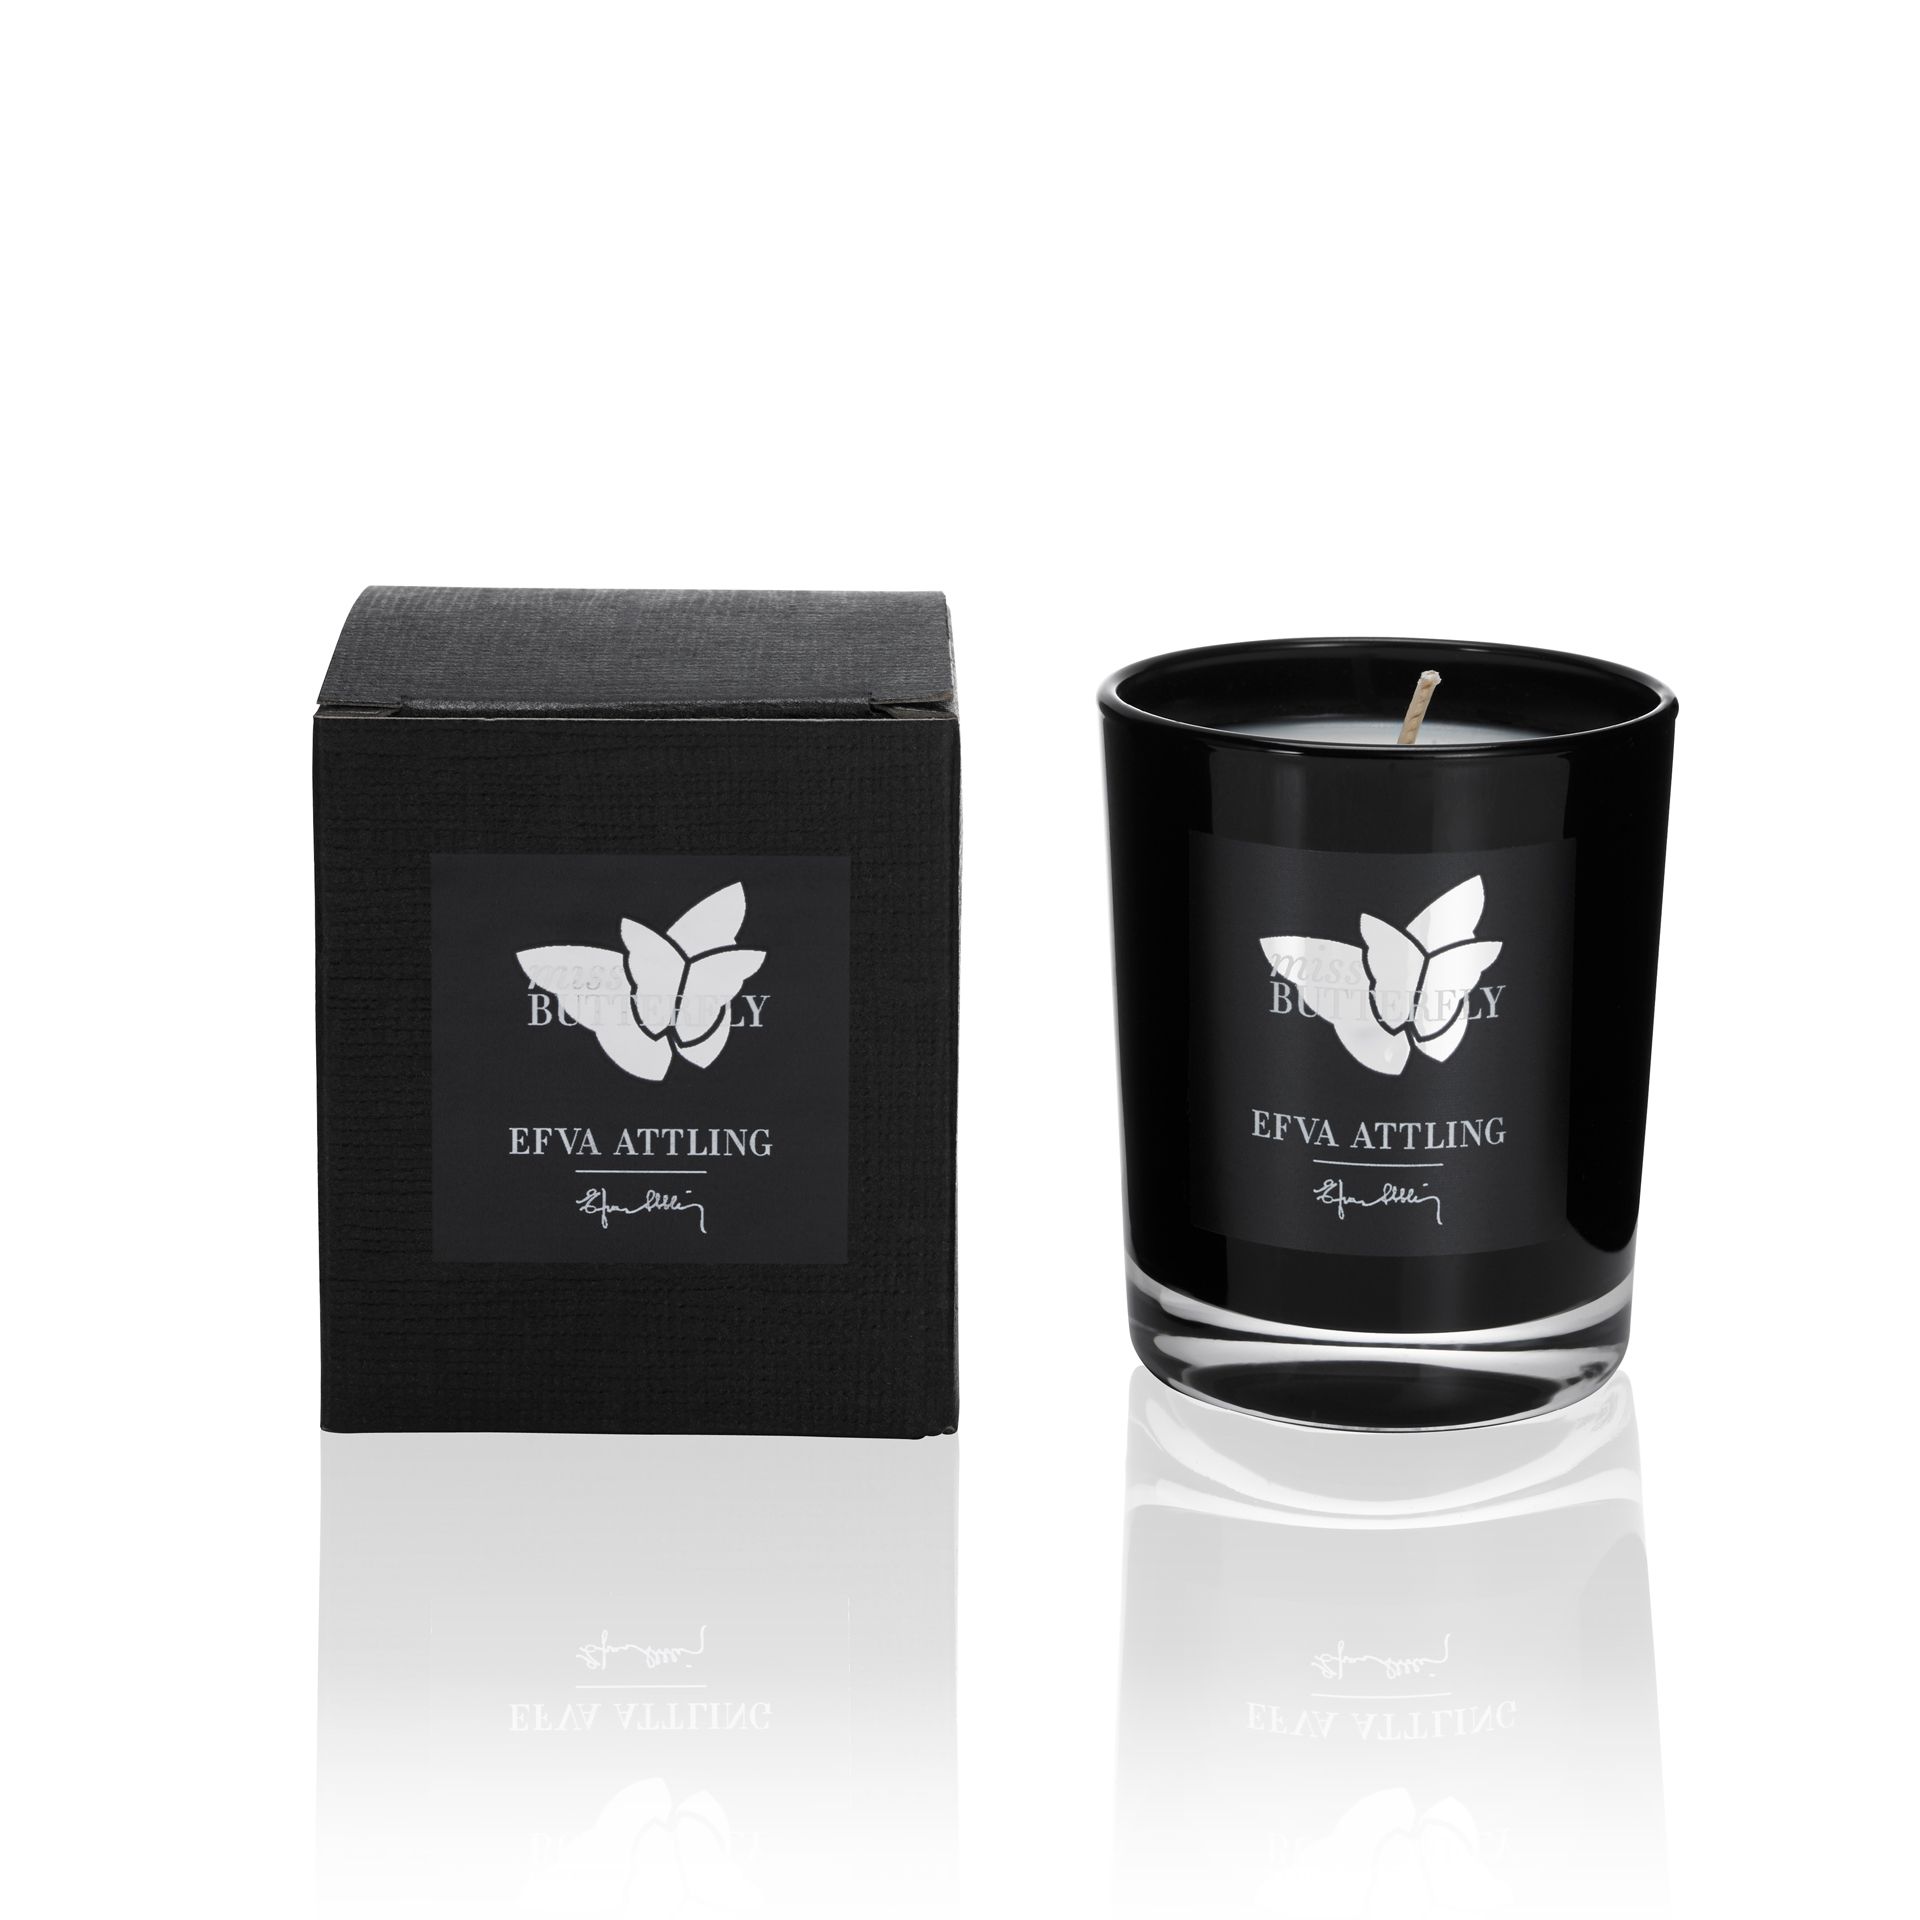 Efva Attling SCENTED CANDLE MINI – MISS BUTTERFLY.